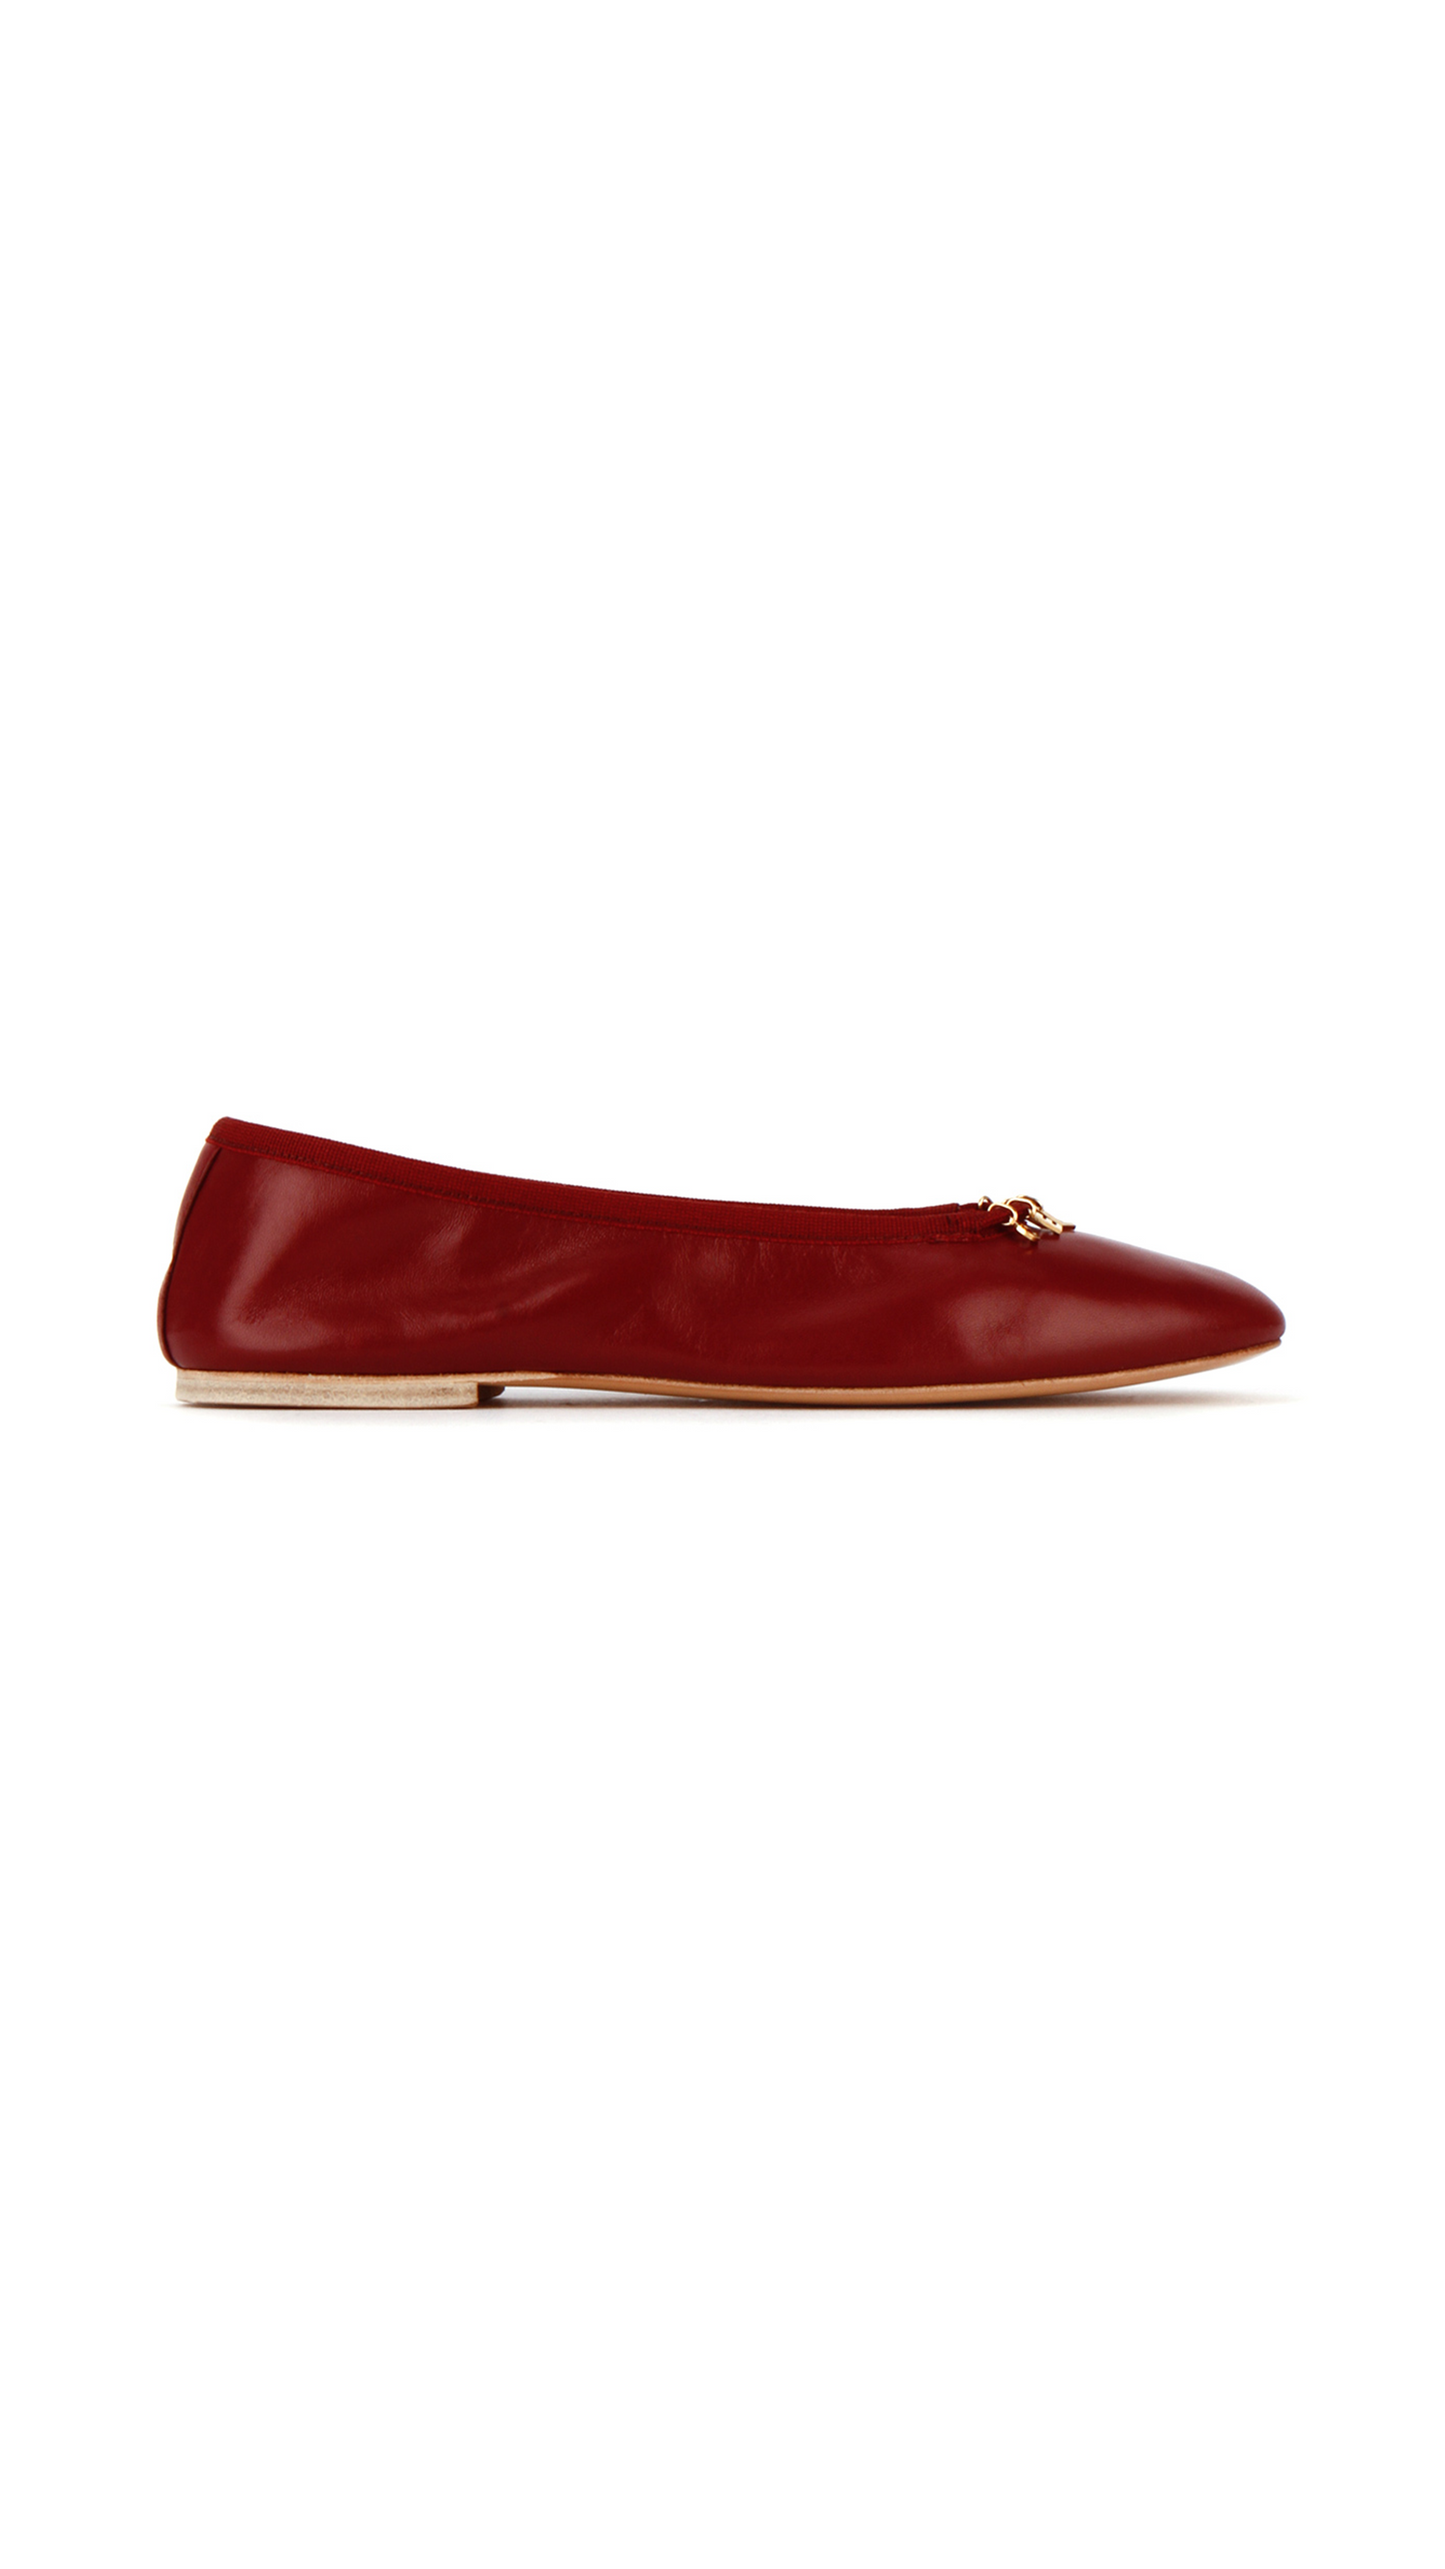 Les Ballerines Celine Ballerina With Charms In Lambskin - Red